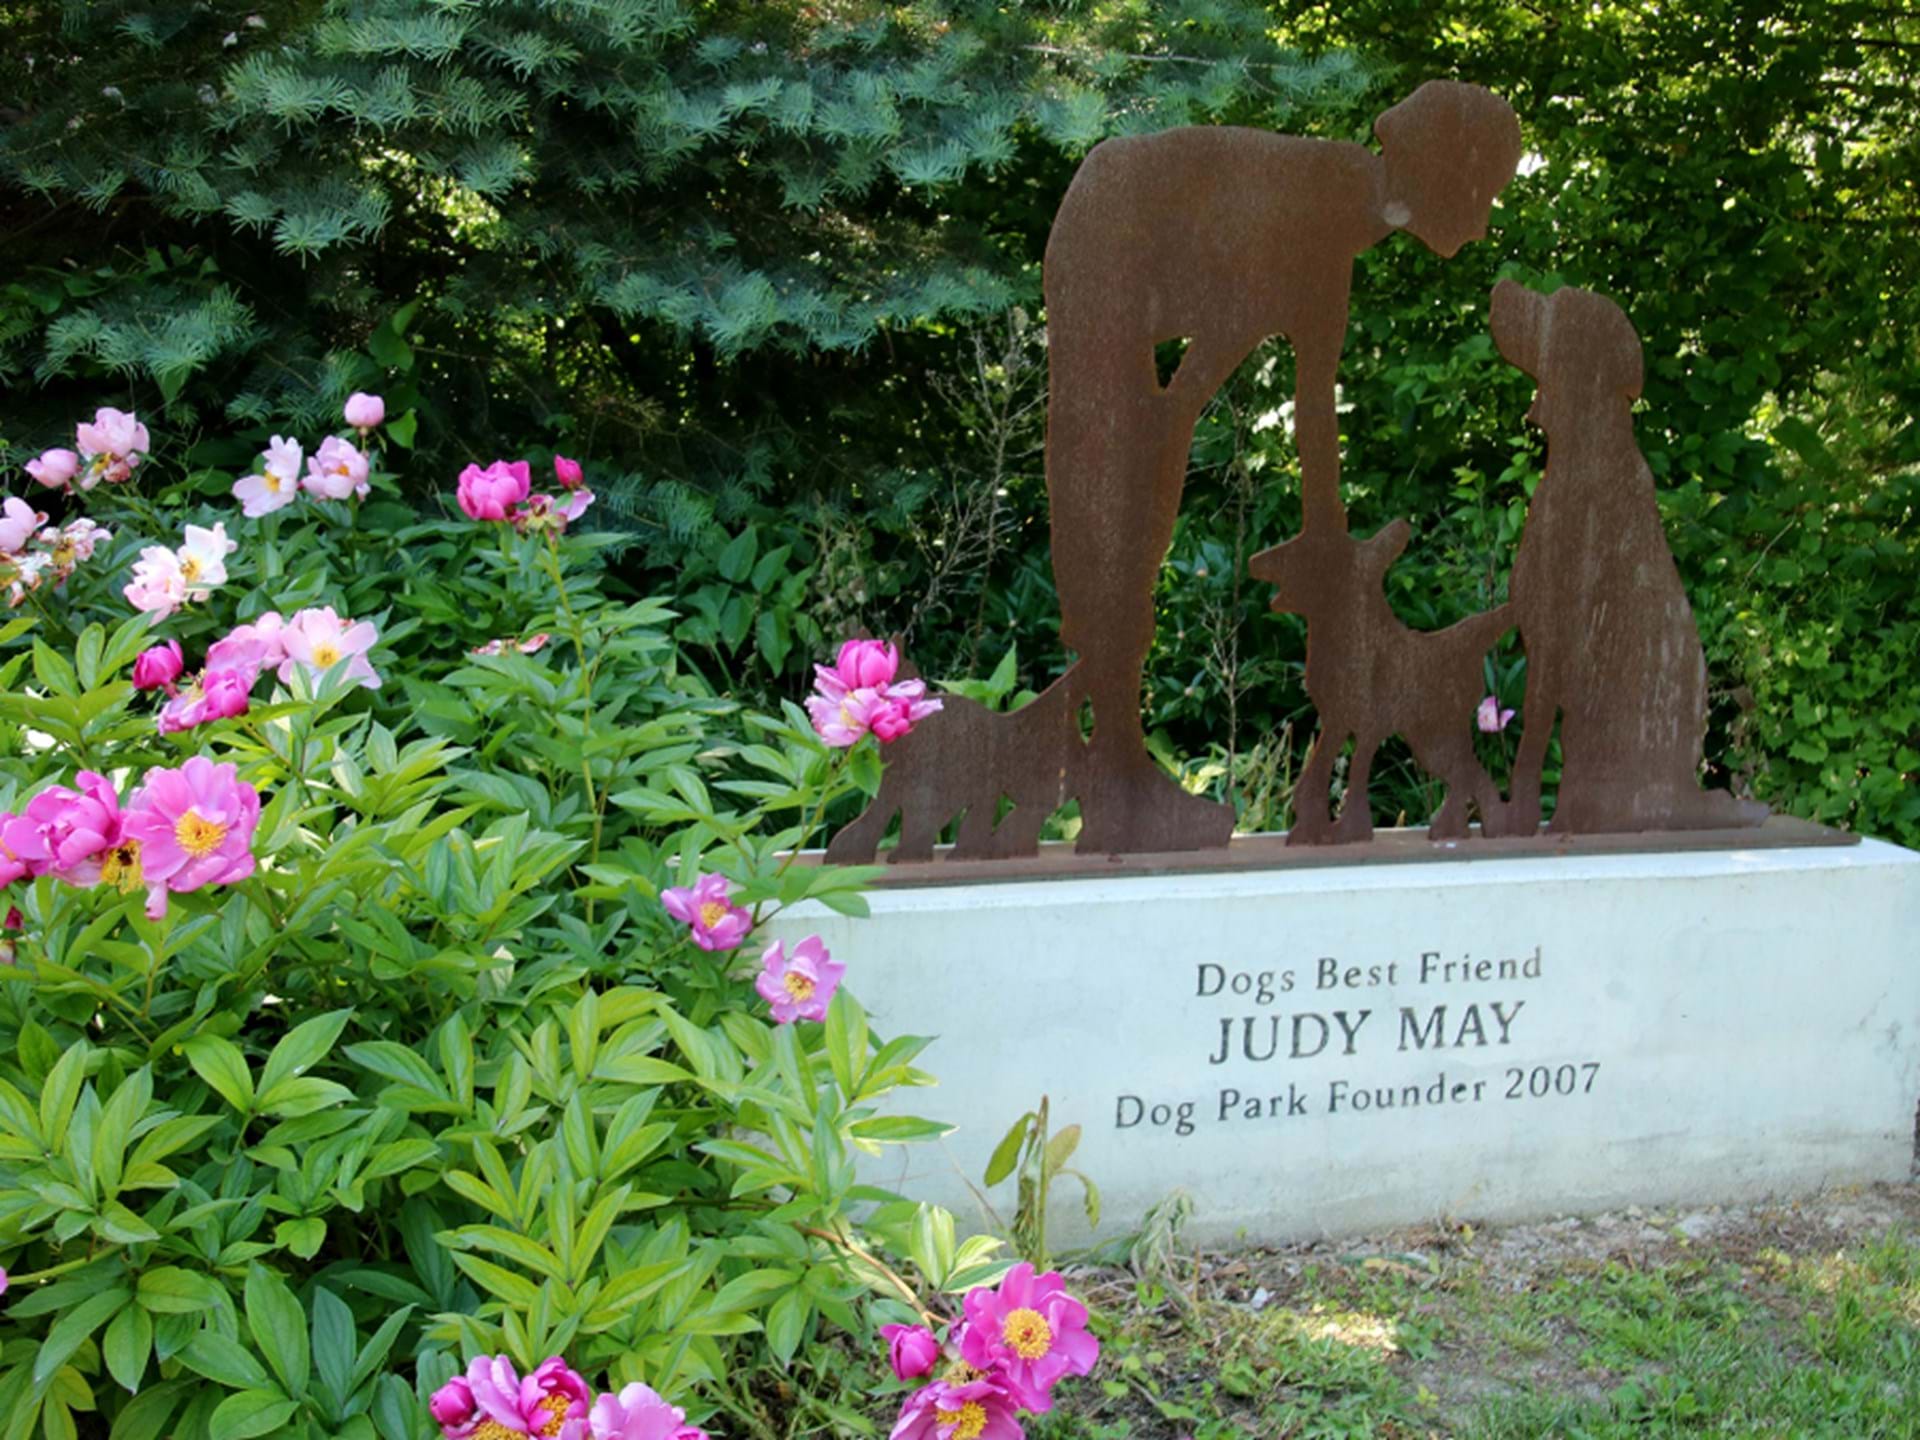 To Judy May, Dog Park Founder